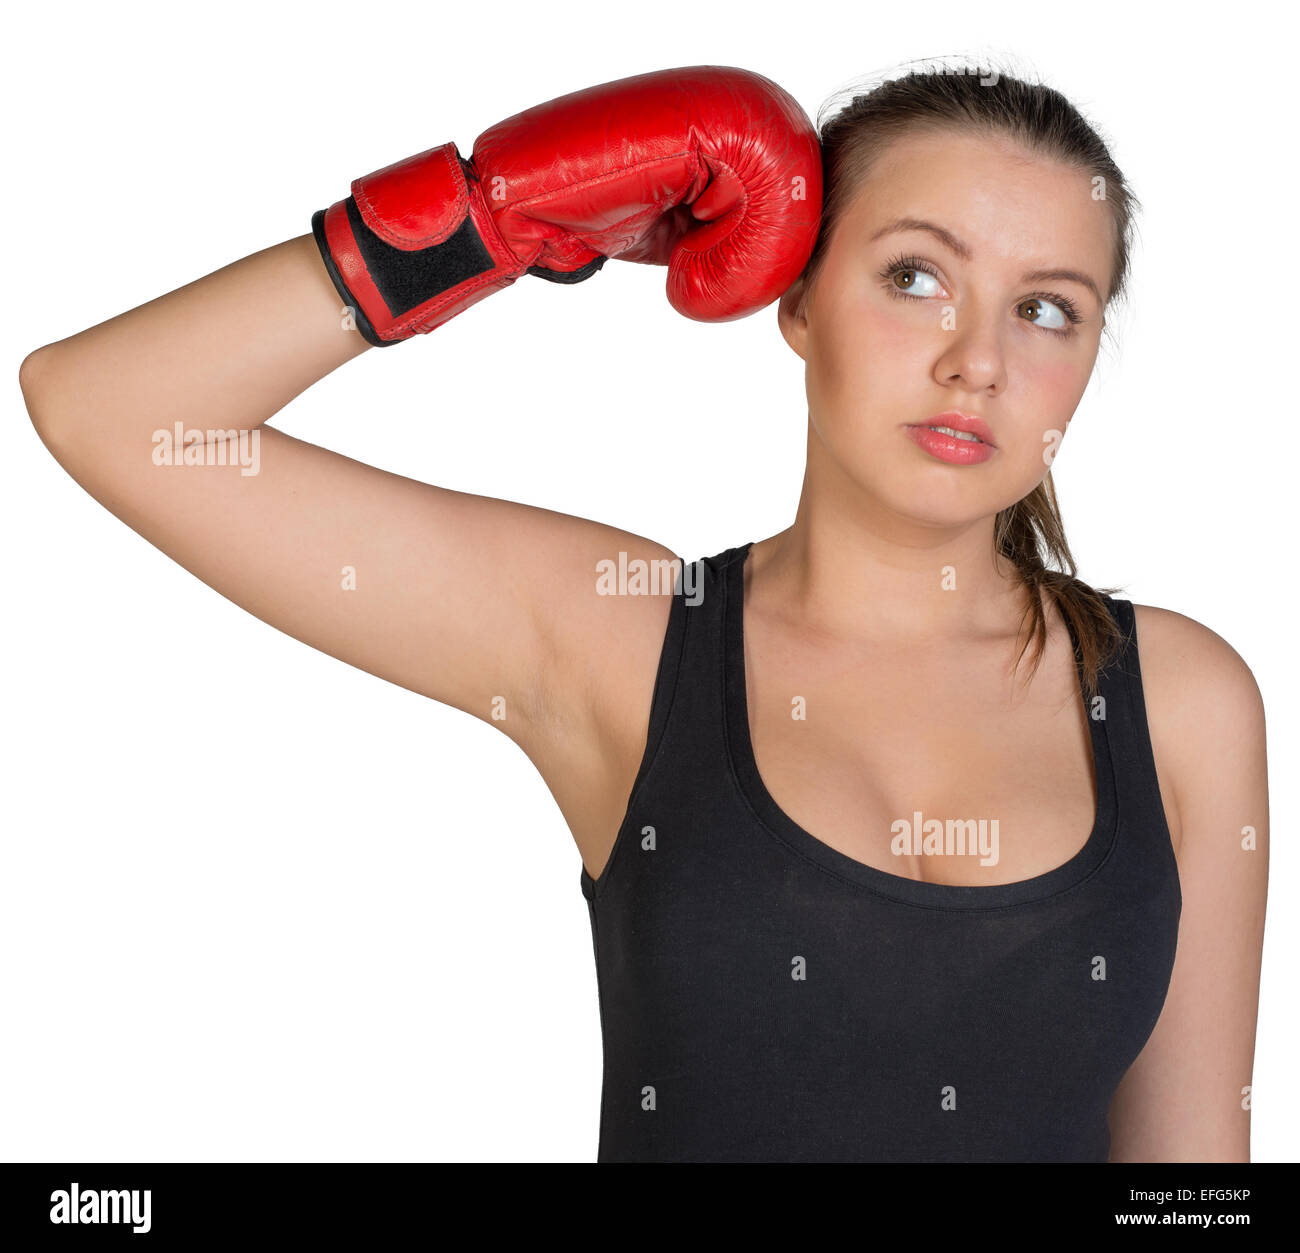 Woman holding boxing glove at her temple Stock Photo